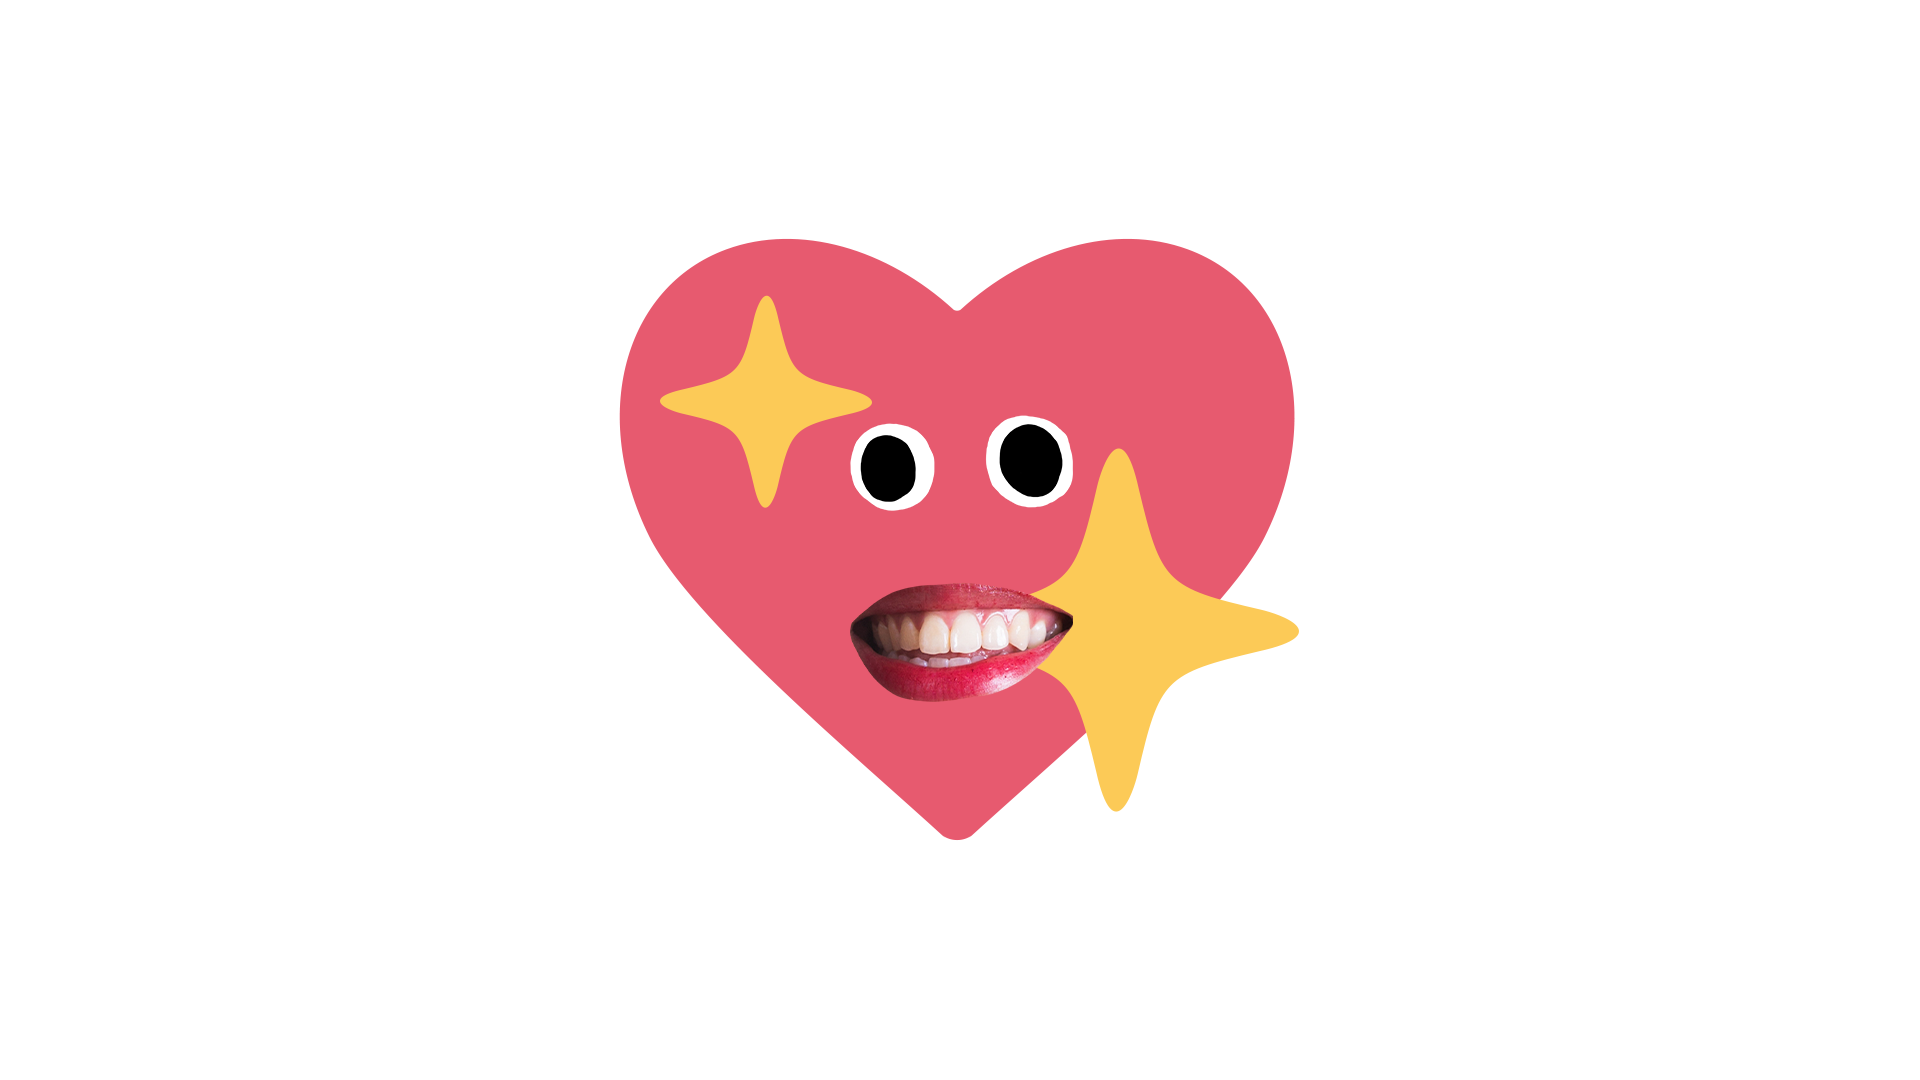 Sparkle heart emoji with goofy face on white background